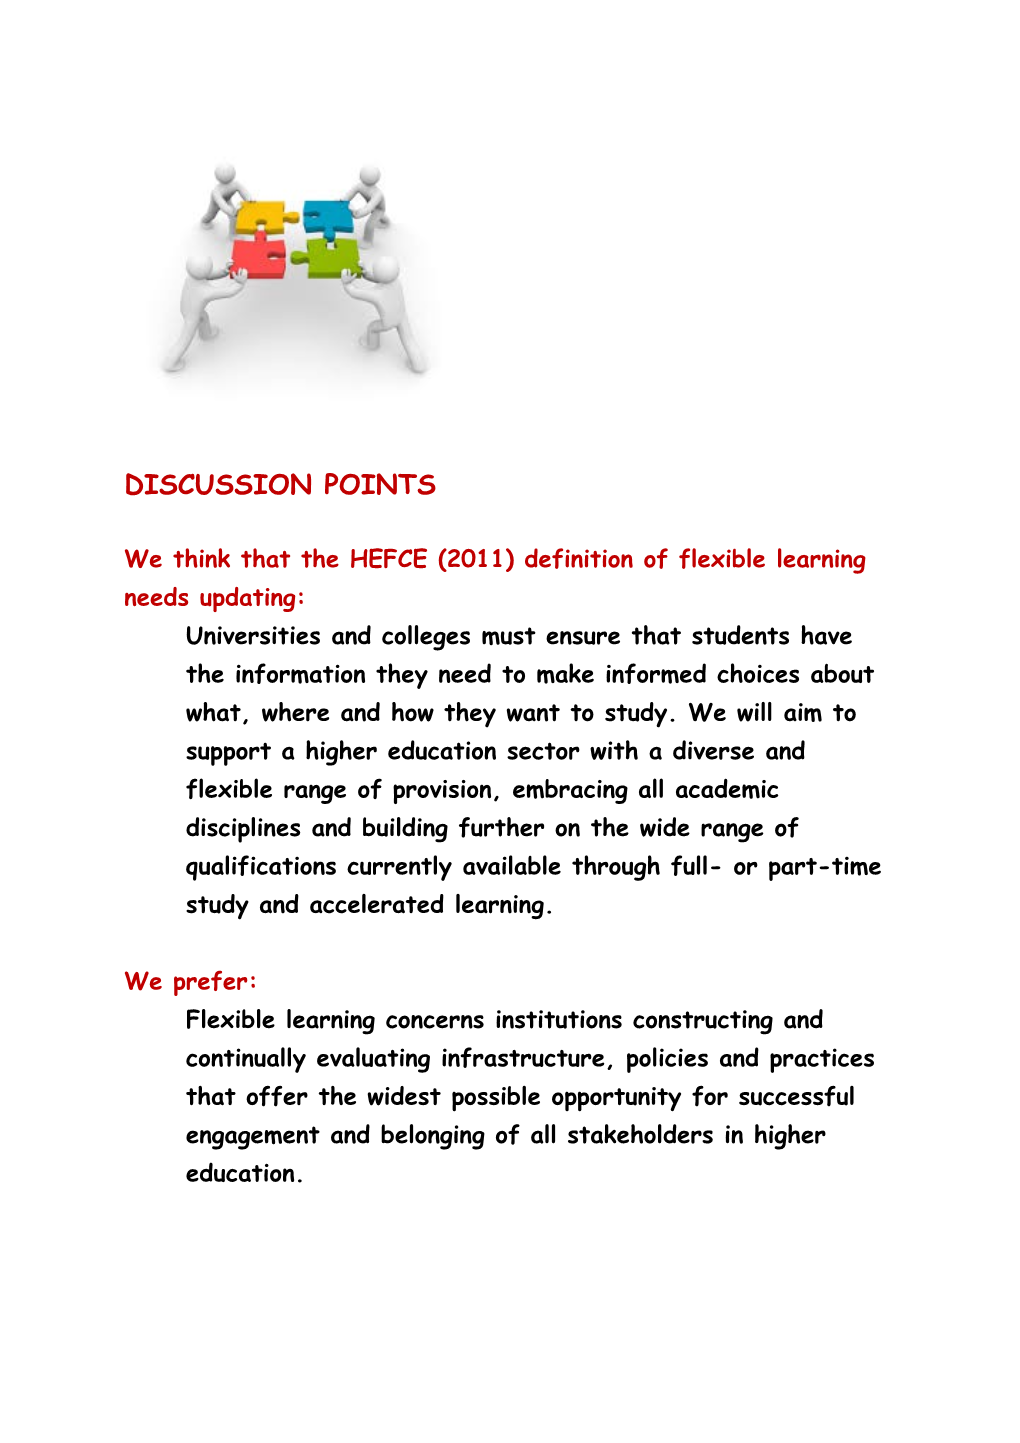 We Think That the HEFCE (2011) Definition of Flexible Learning Needs Updating